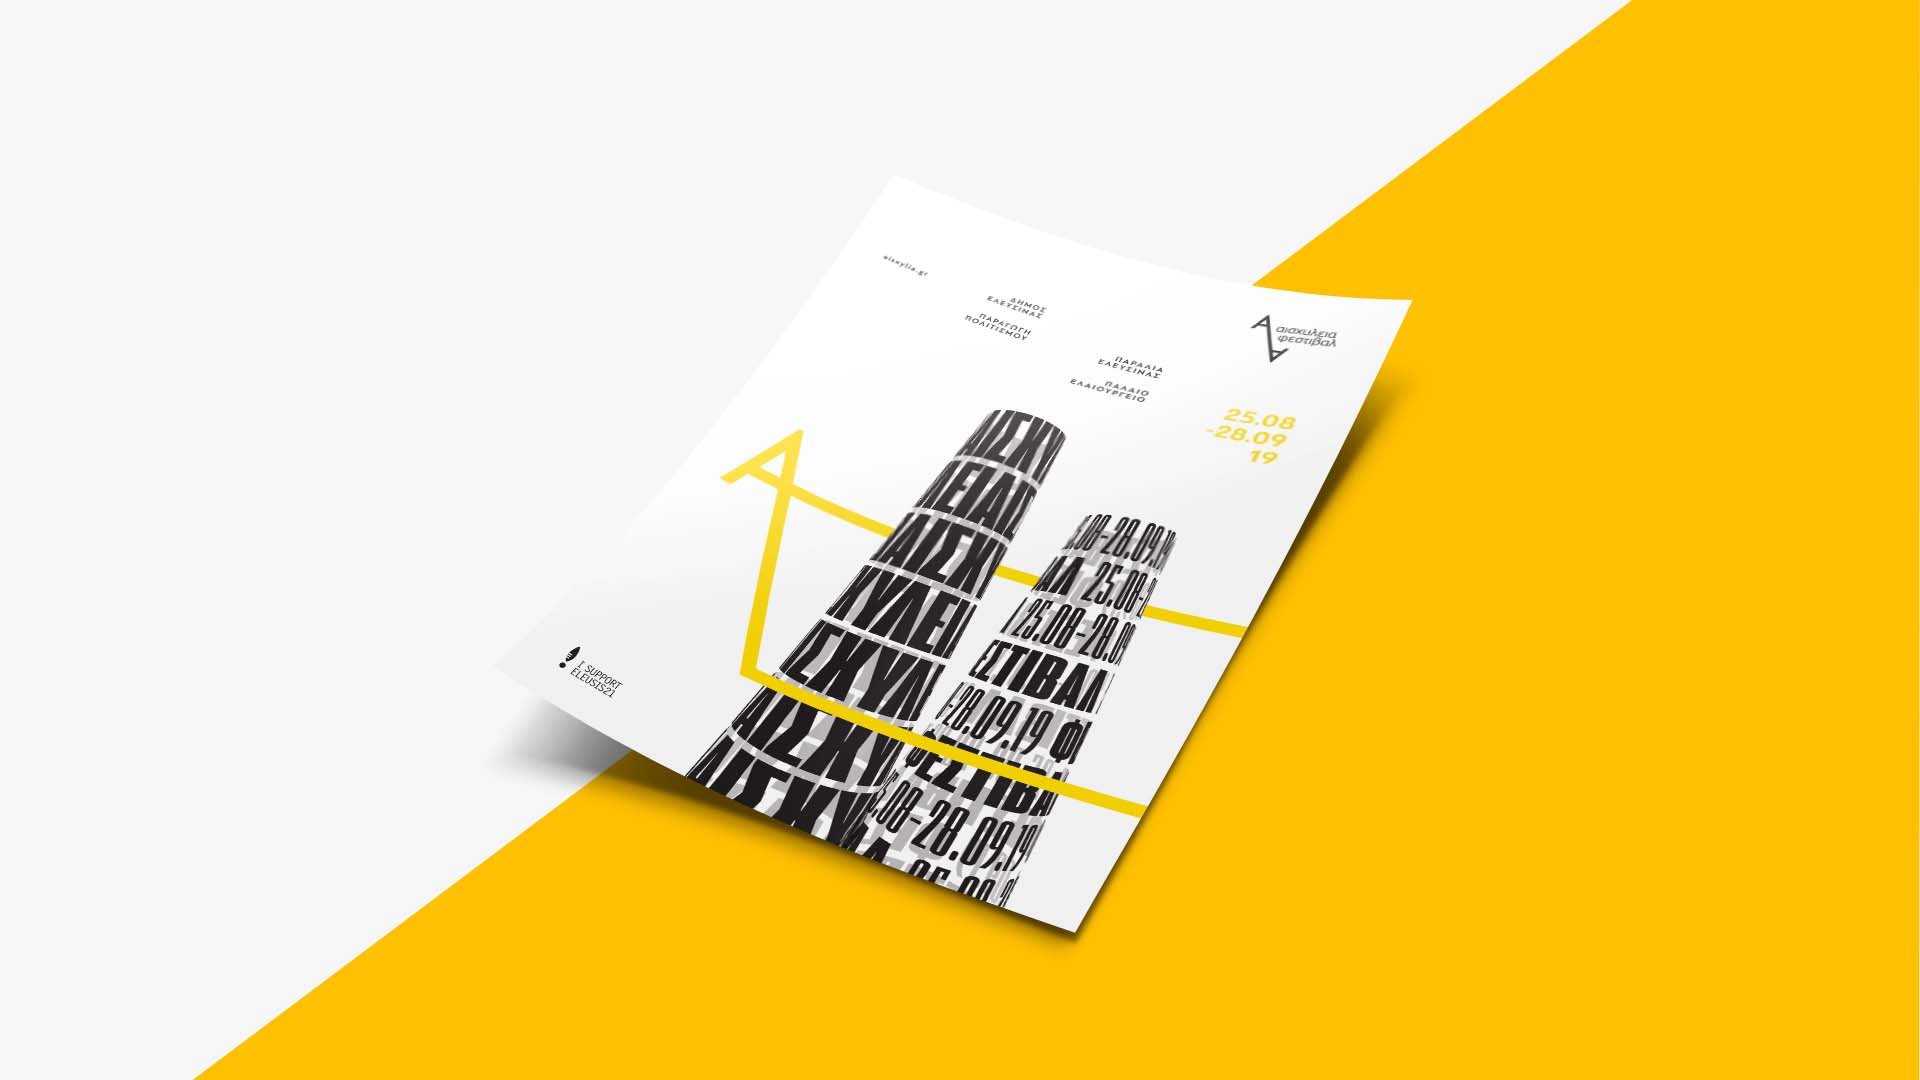 Aeschylia Festival 2019 white and yellow branded poster